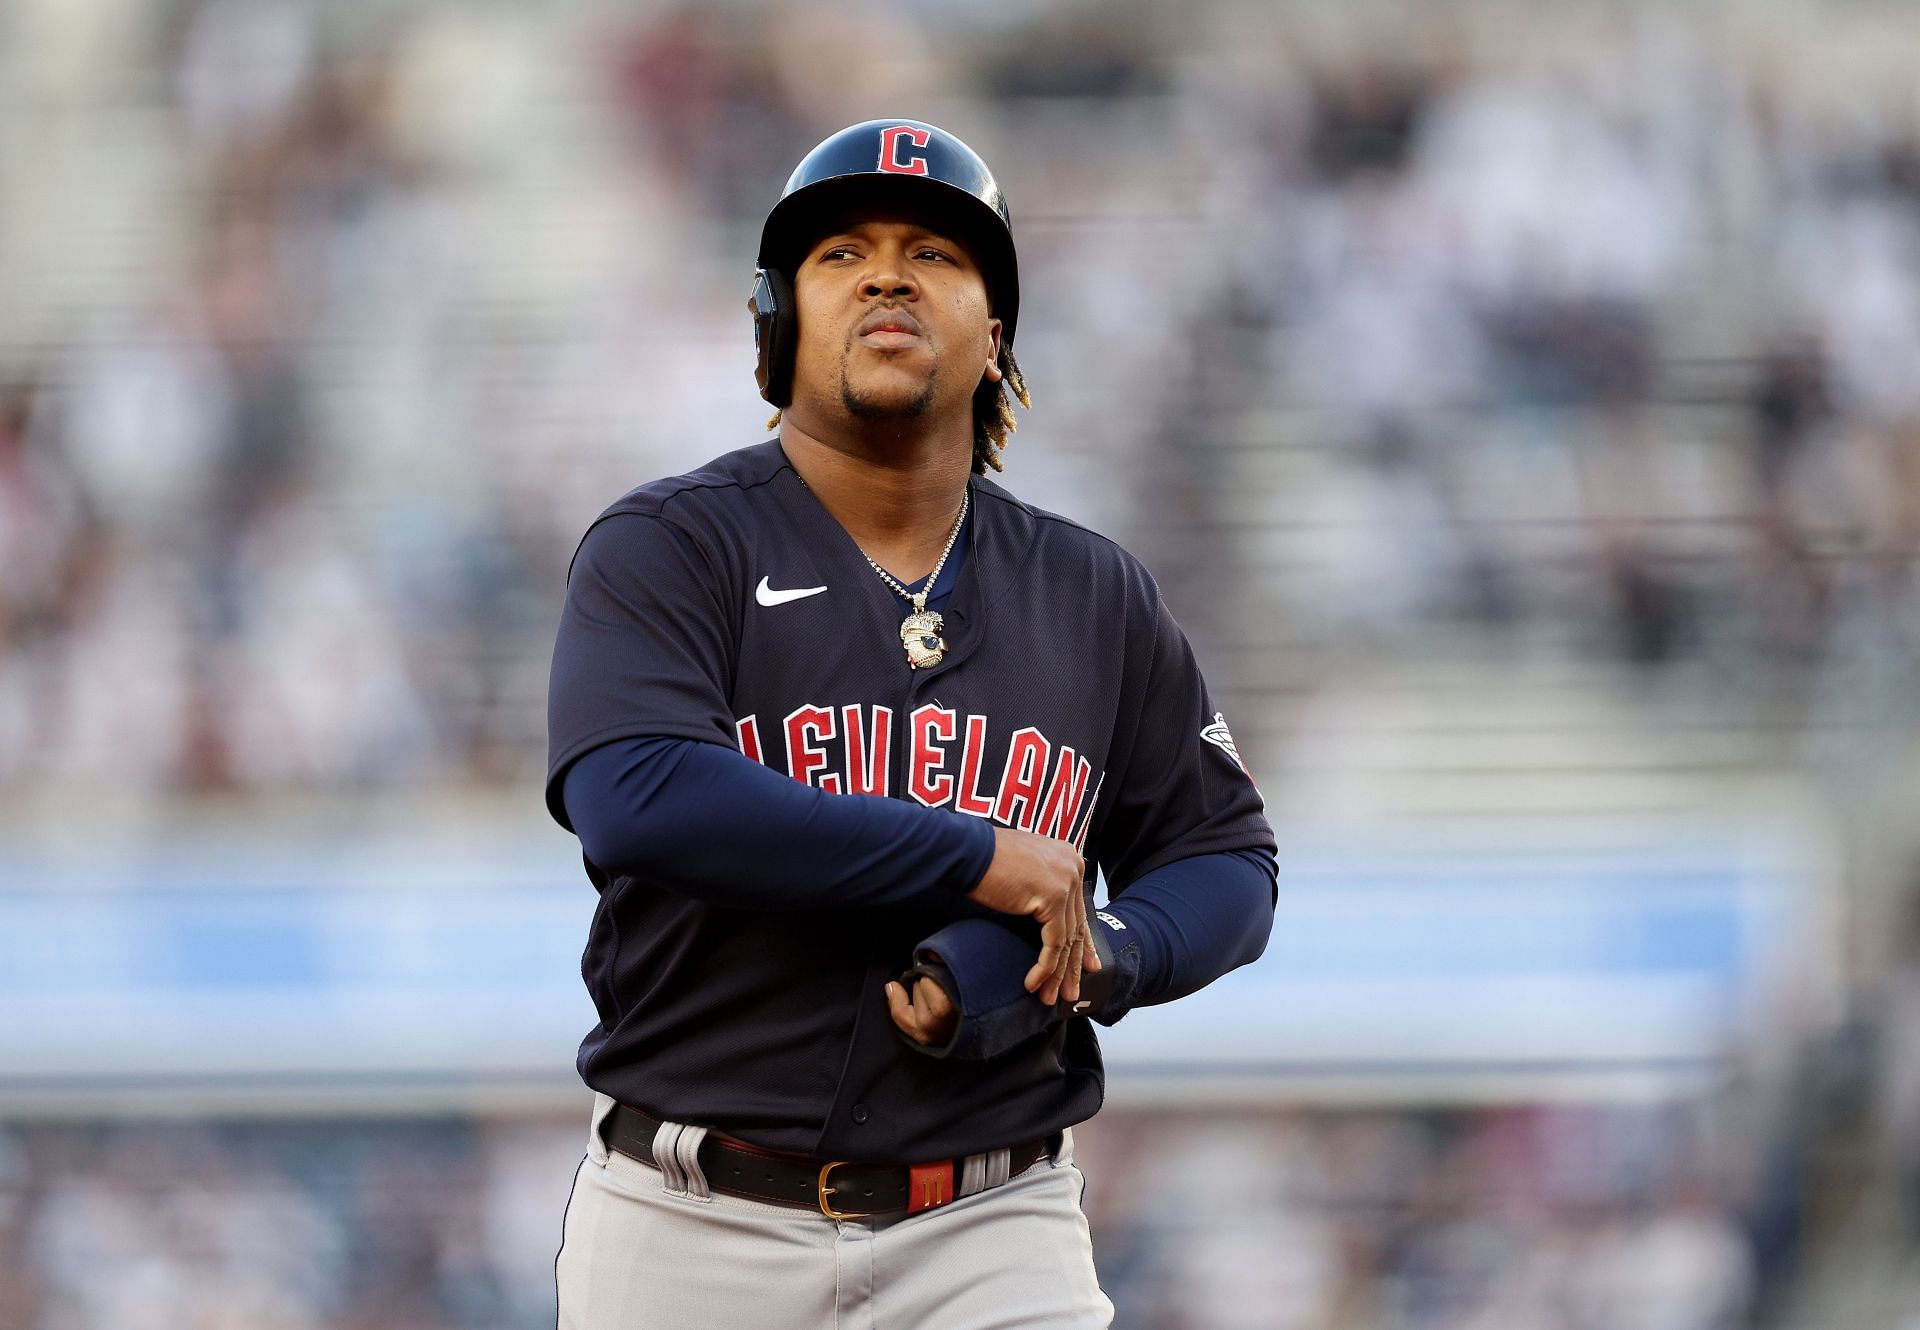 Report: Cleveland 'not interested in' trading Jose Ramirez